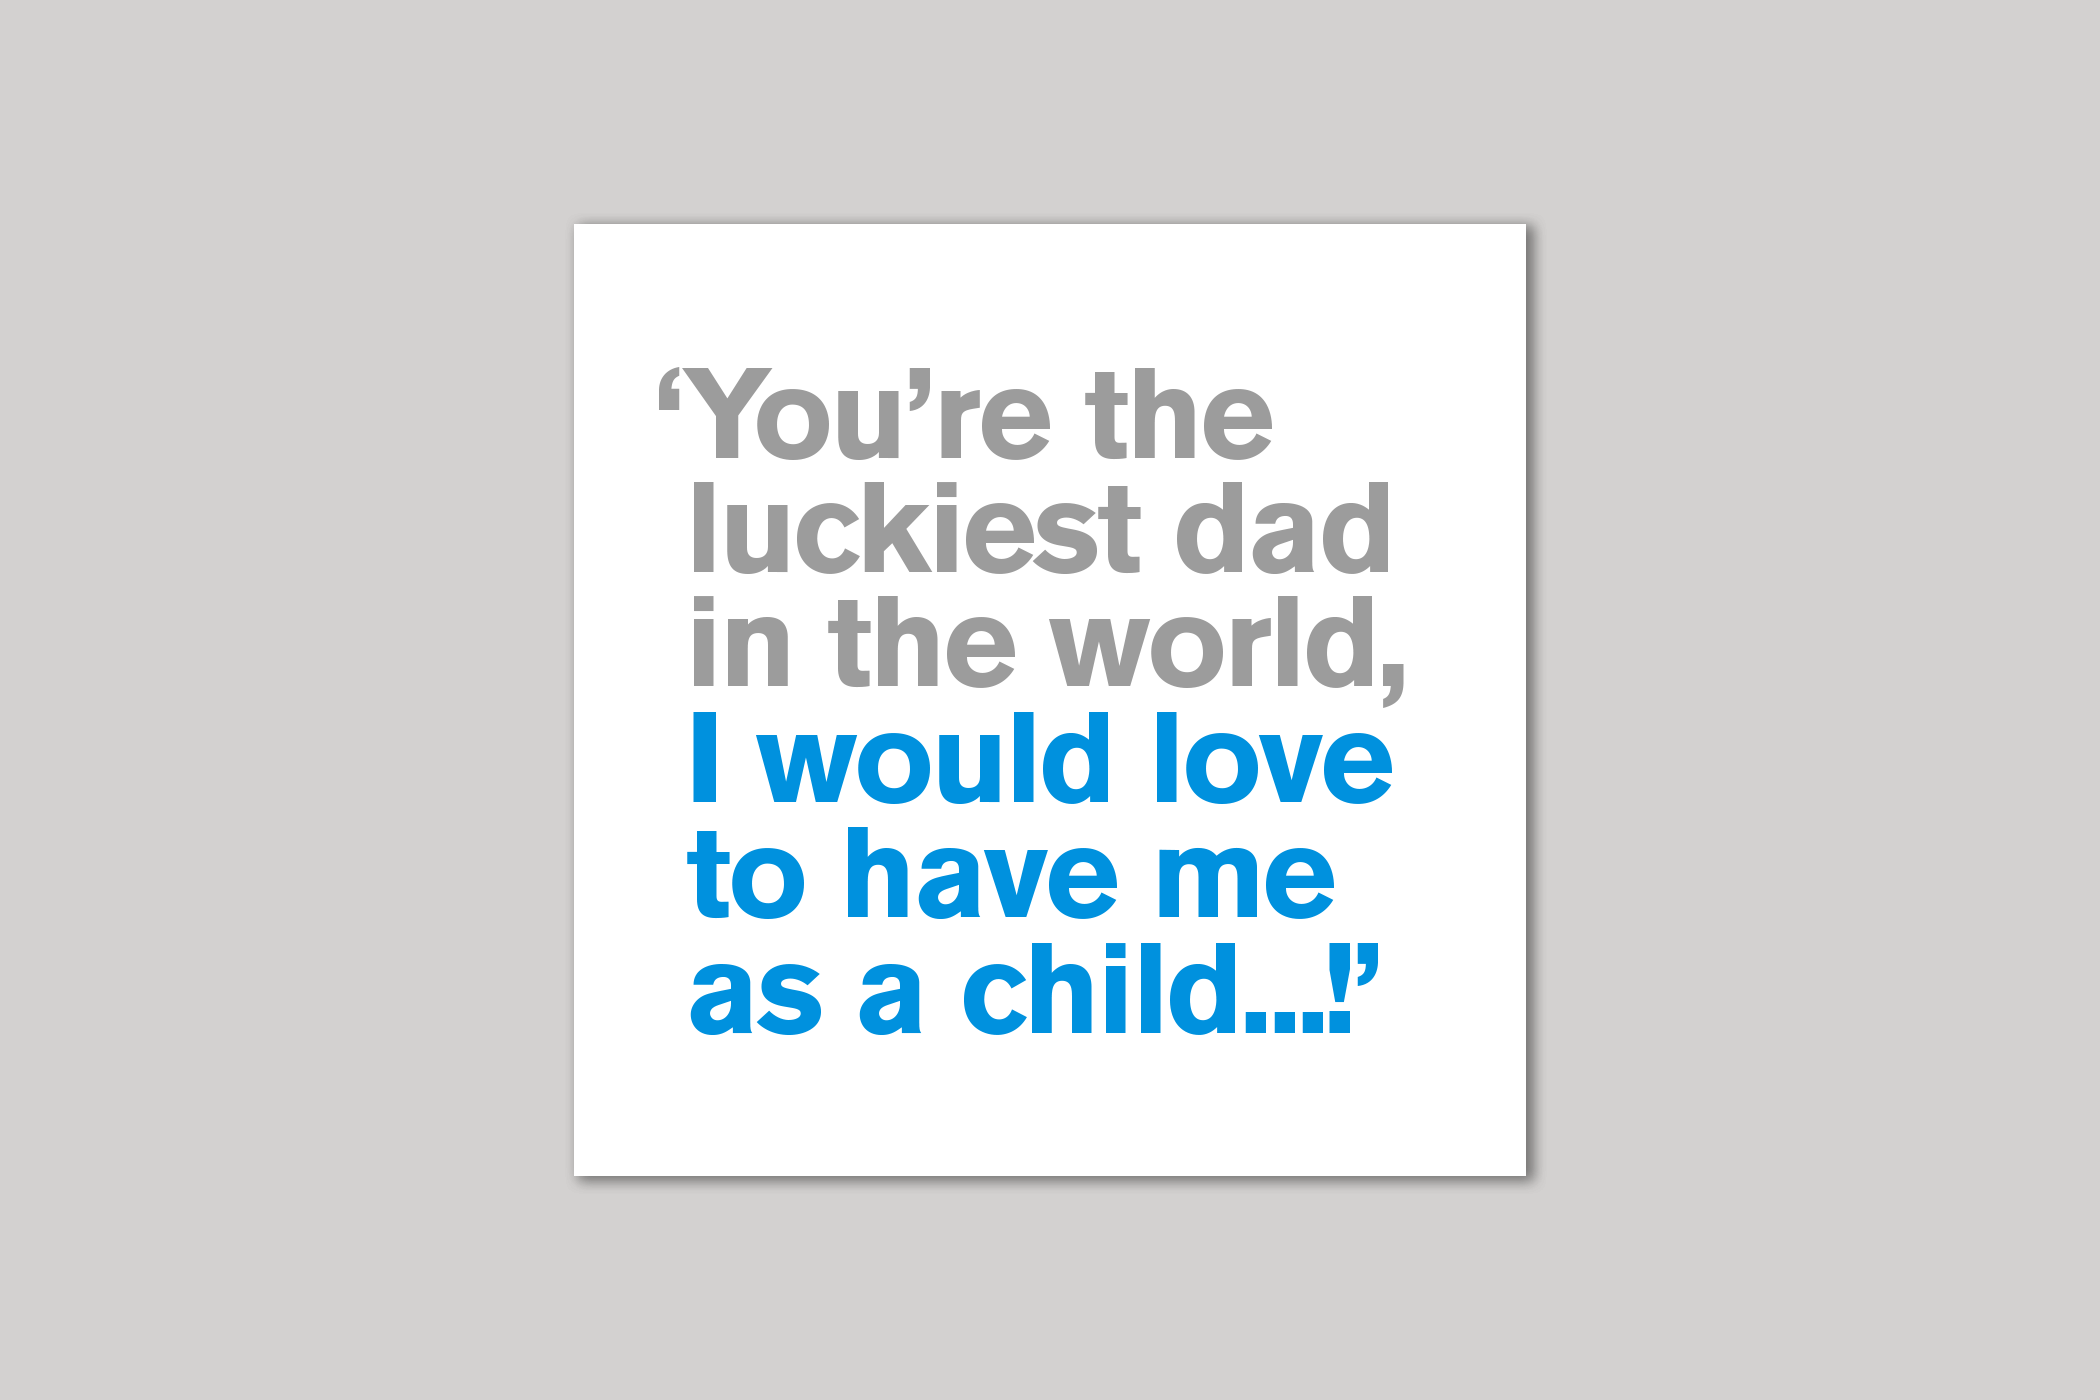 Luckiest Dad dad card from Lyric range of quotation cards by Icon.